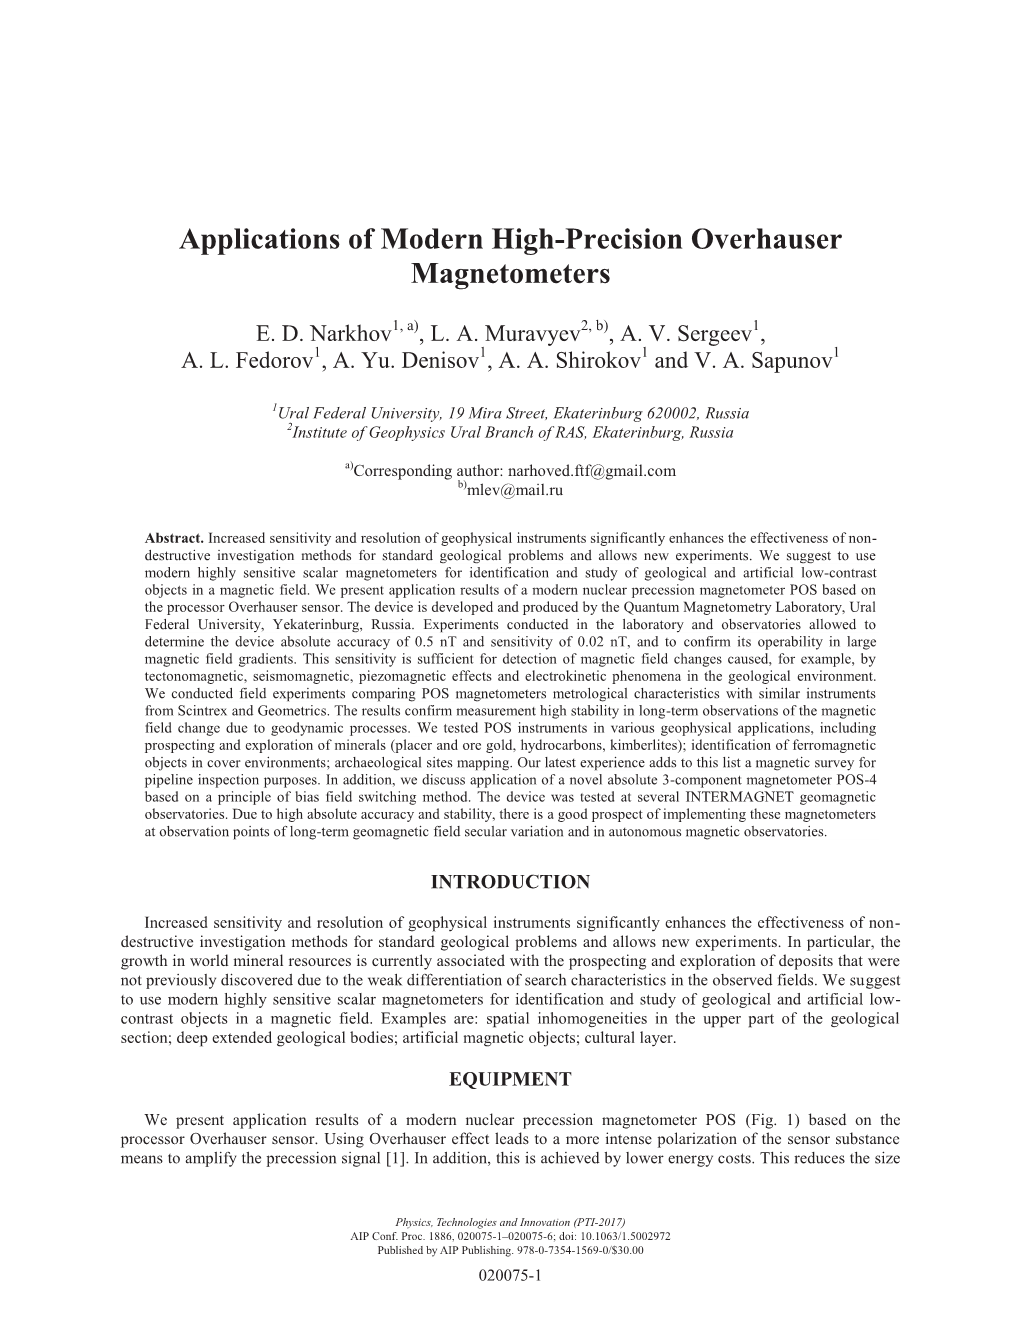 Applications of Modern High-Precision Overhauser Magnetometers